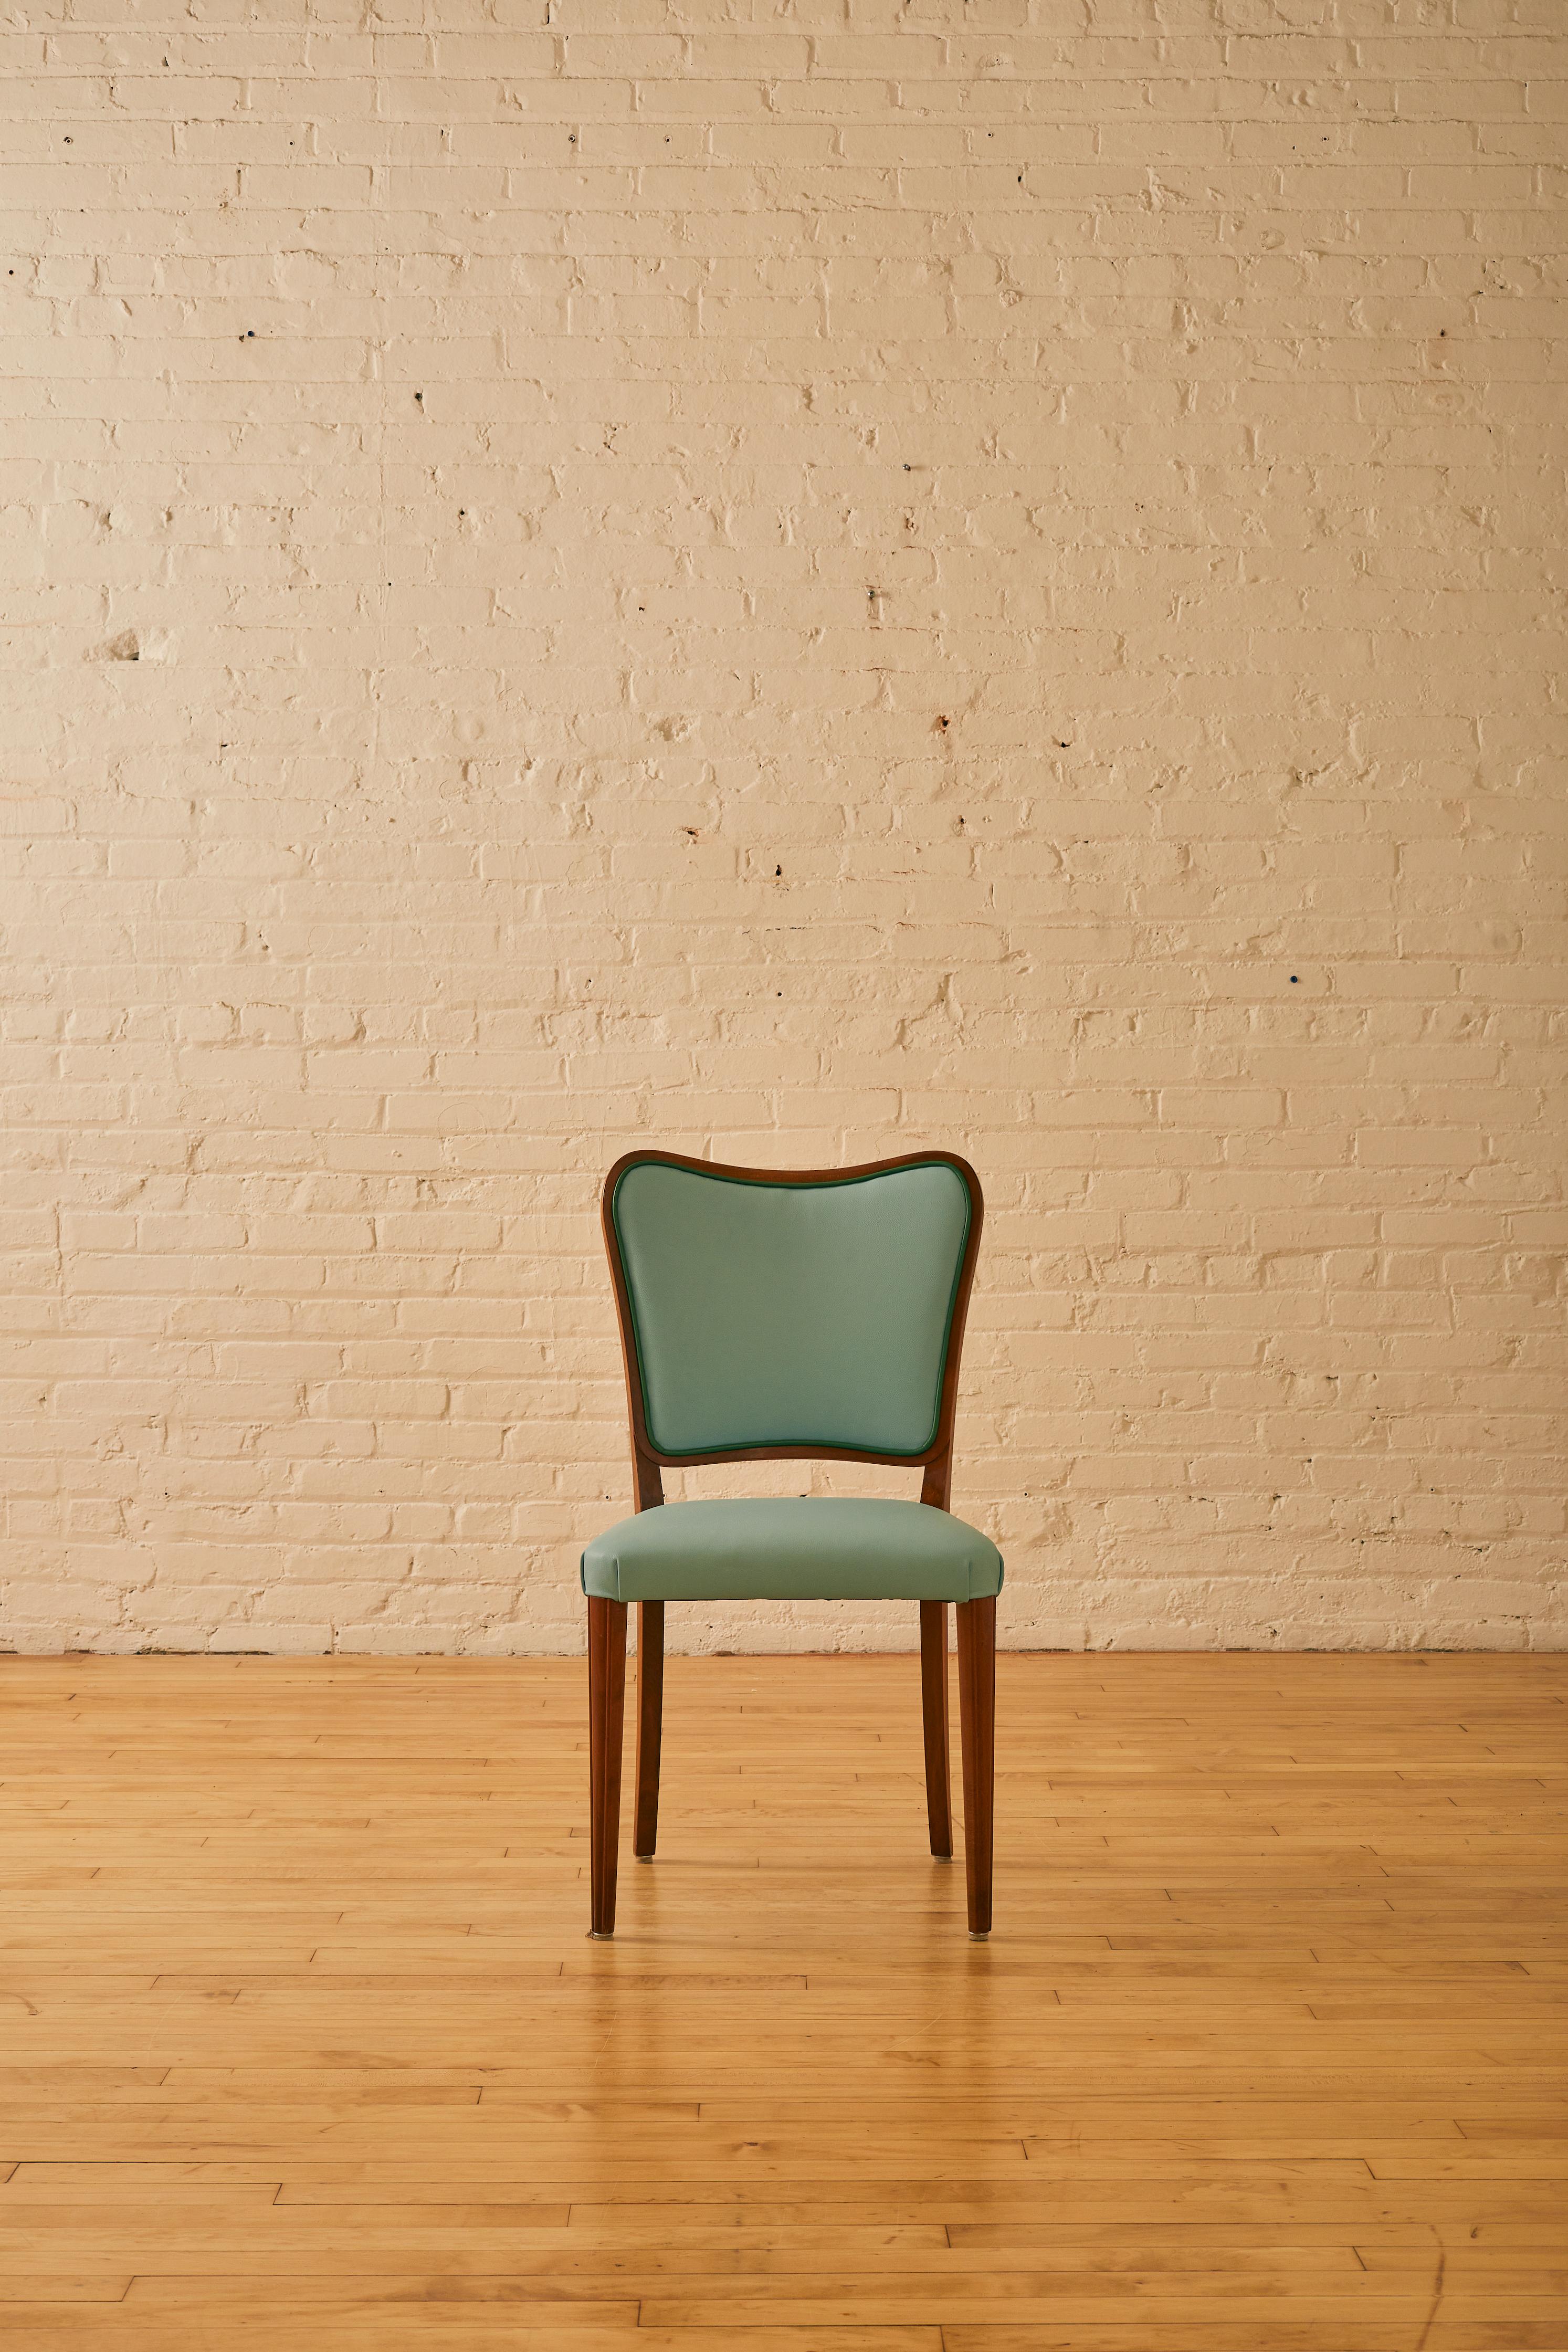 Set of 4 Danish Dining Chairs with teak wood. Newly reupholstered in light blue Italian leather with green leather piping.